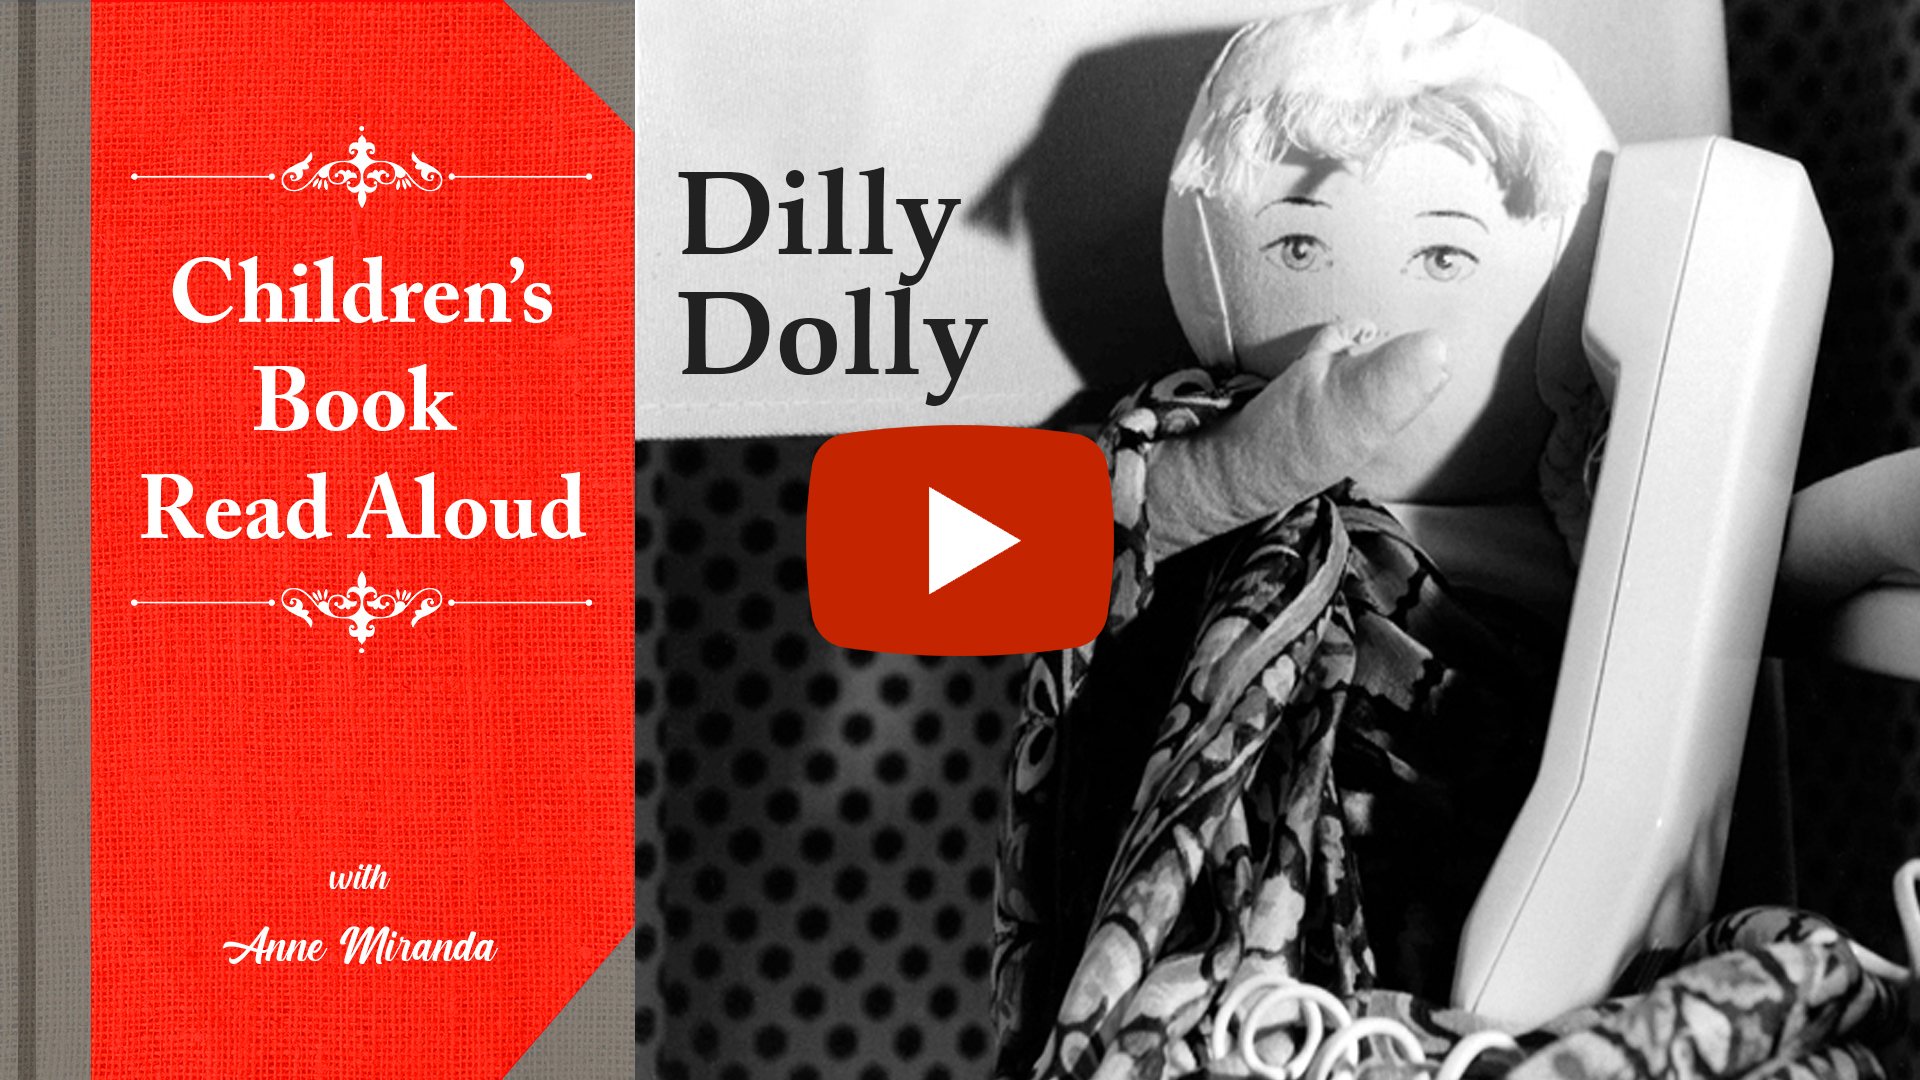 Dilly Dolly